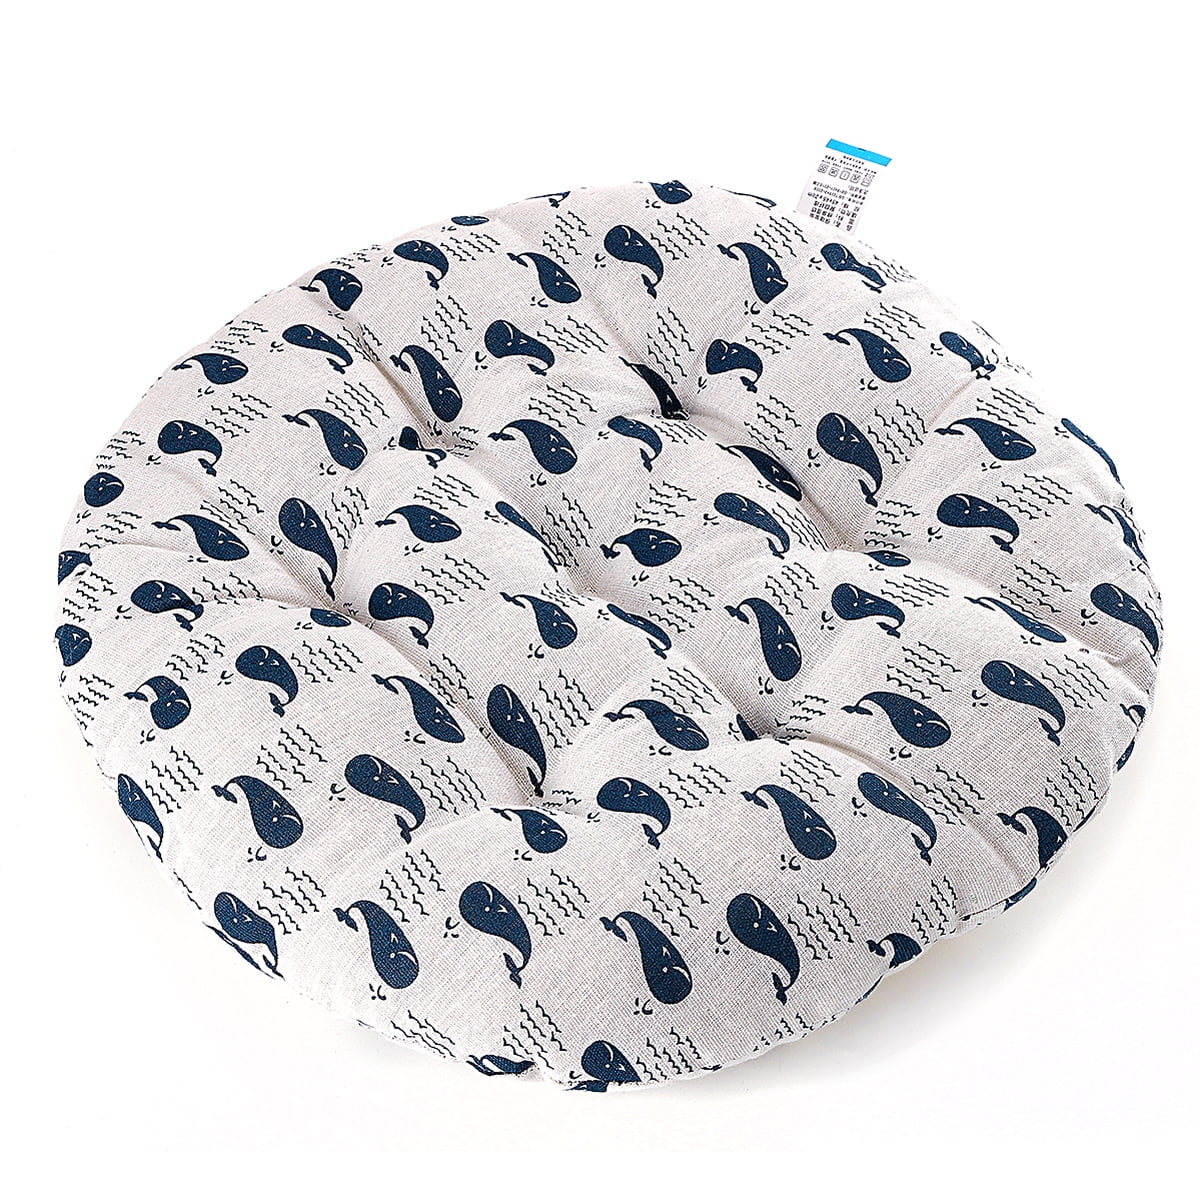 16x16 inches Seat Cushion Nordic Style Comfortable Thick Chair Cushion